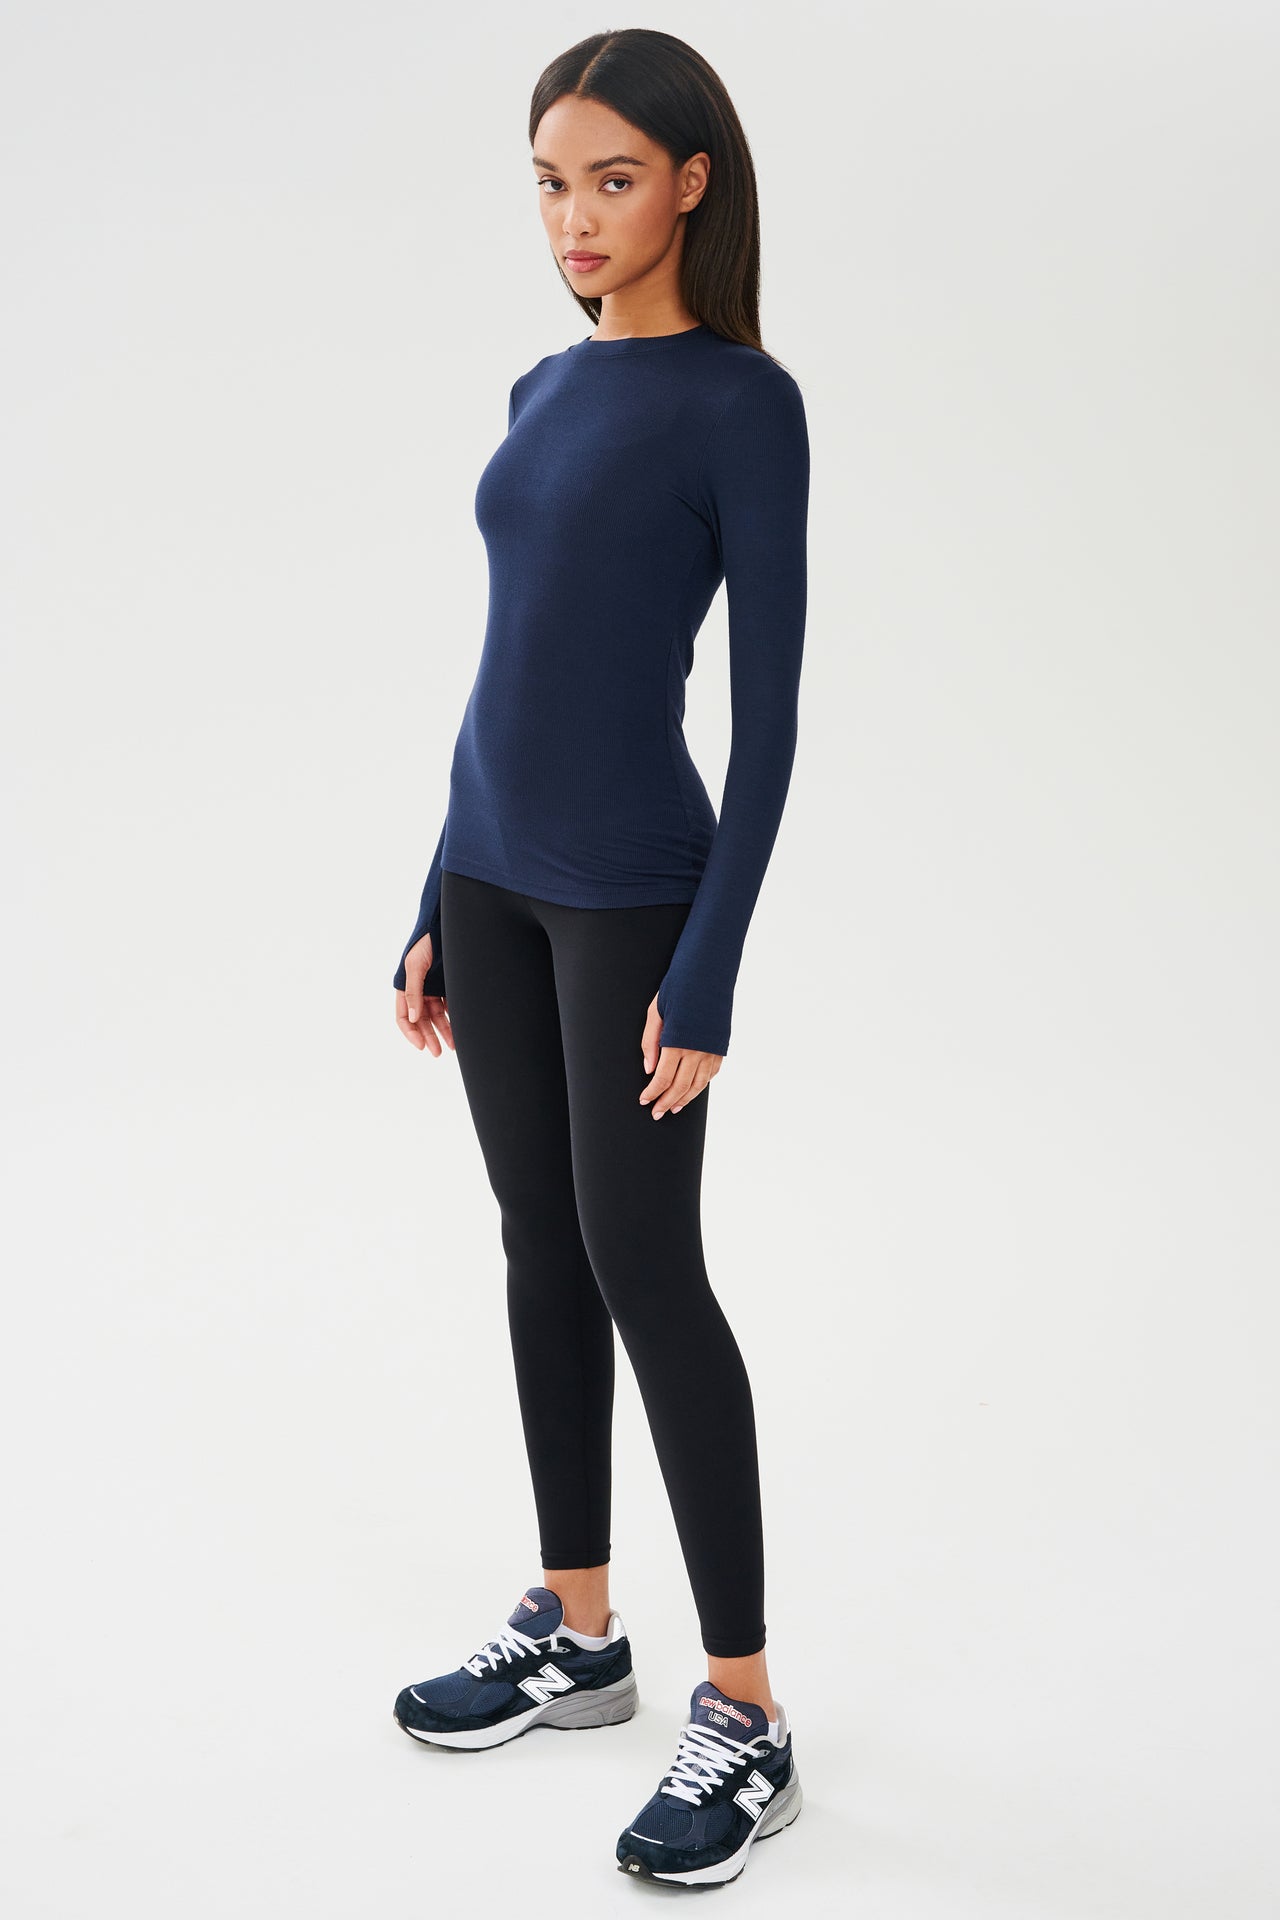 A woman wearing a SPLITS59 Louise Rib Long Sleeve in Indigo and black leggings, ready for her yoga session.